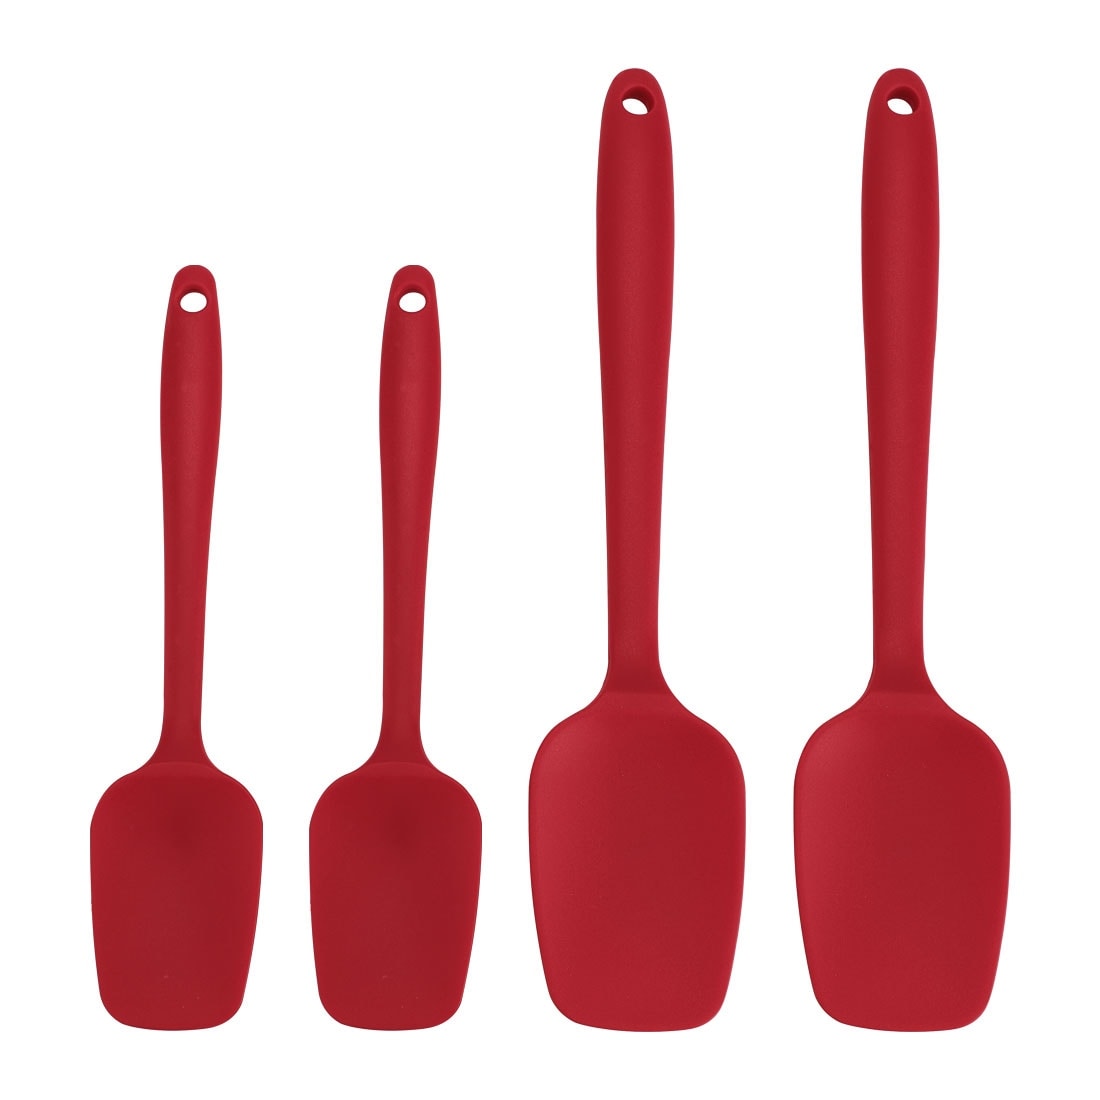 https://ak1.ostkcdn.com/images/products/is/images/direct/a13cac075ef5e10644c7003fa4fcde202a9eb964/4-Pcs-Silicone-Spatula-Heat-Resistant-Non-scratch-Kitchen-Turners-Non-Sticky-Spatula-for-Cooking-Baking-and-Mixing-Red.jpg